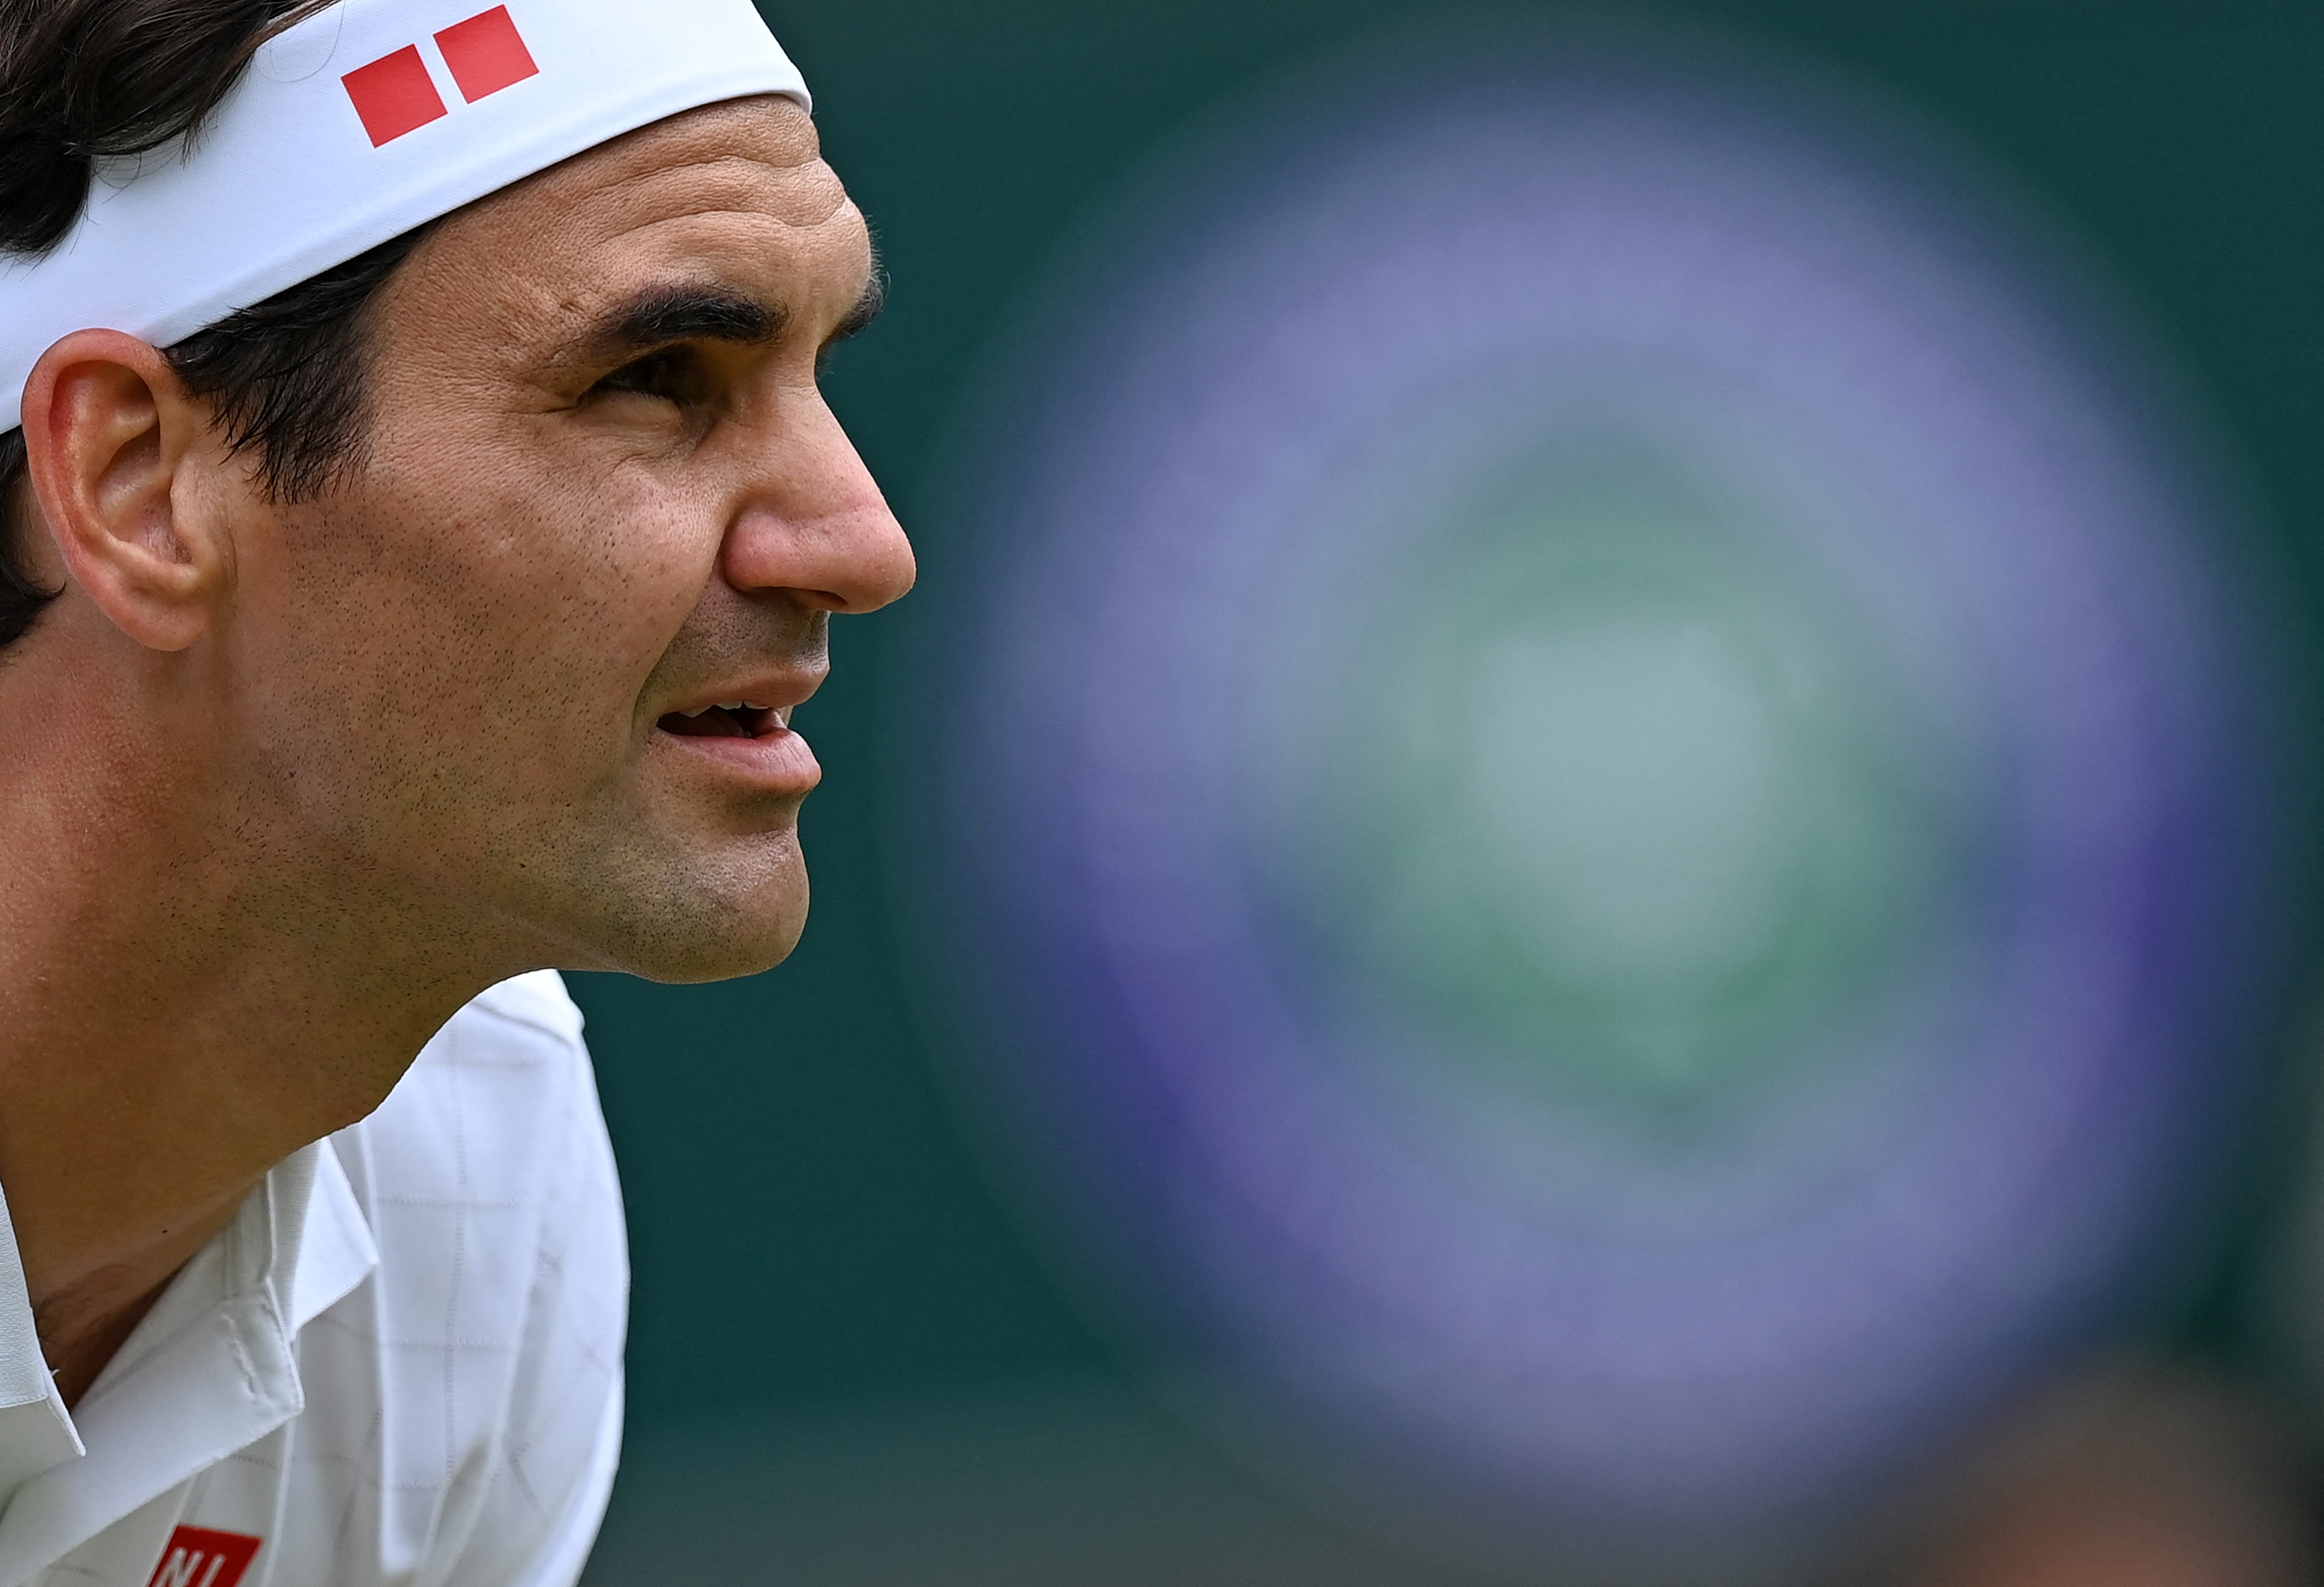 Wimbledon 2021: Roger Federer defeated in straight sets for 1st time in 19 years